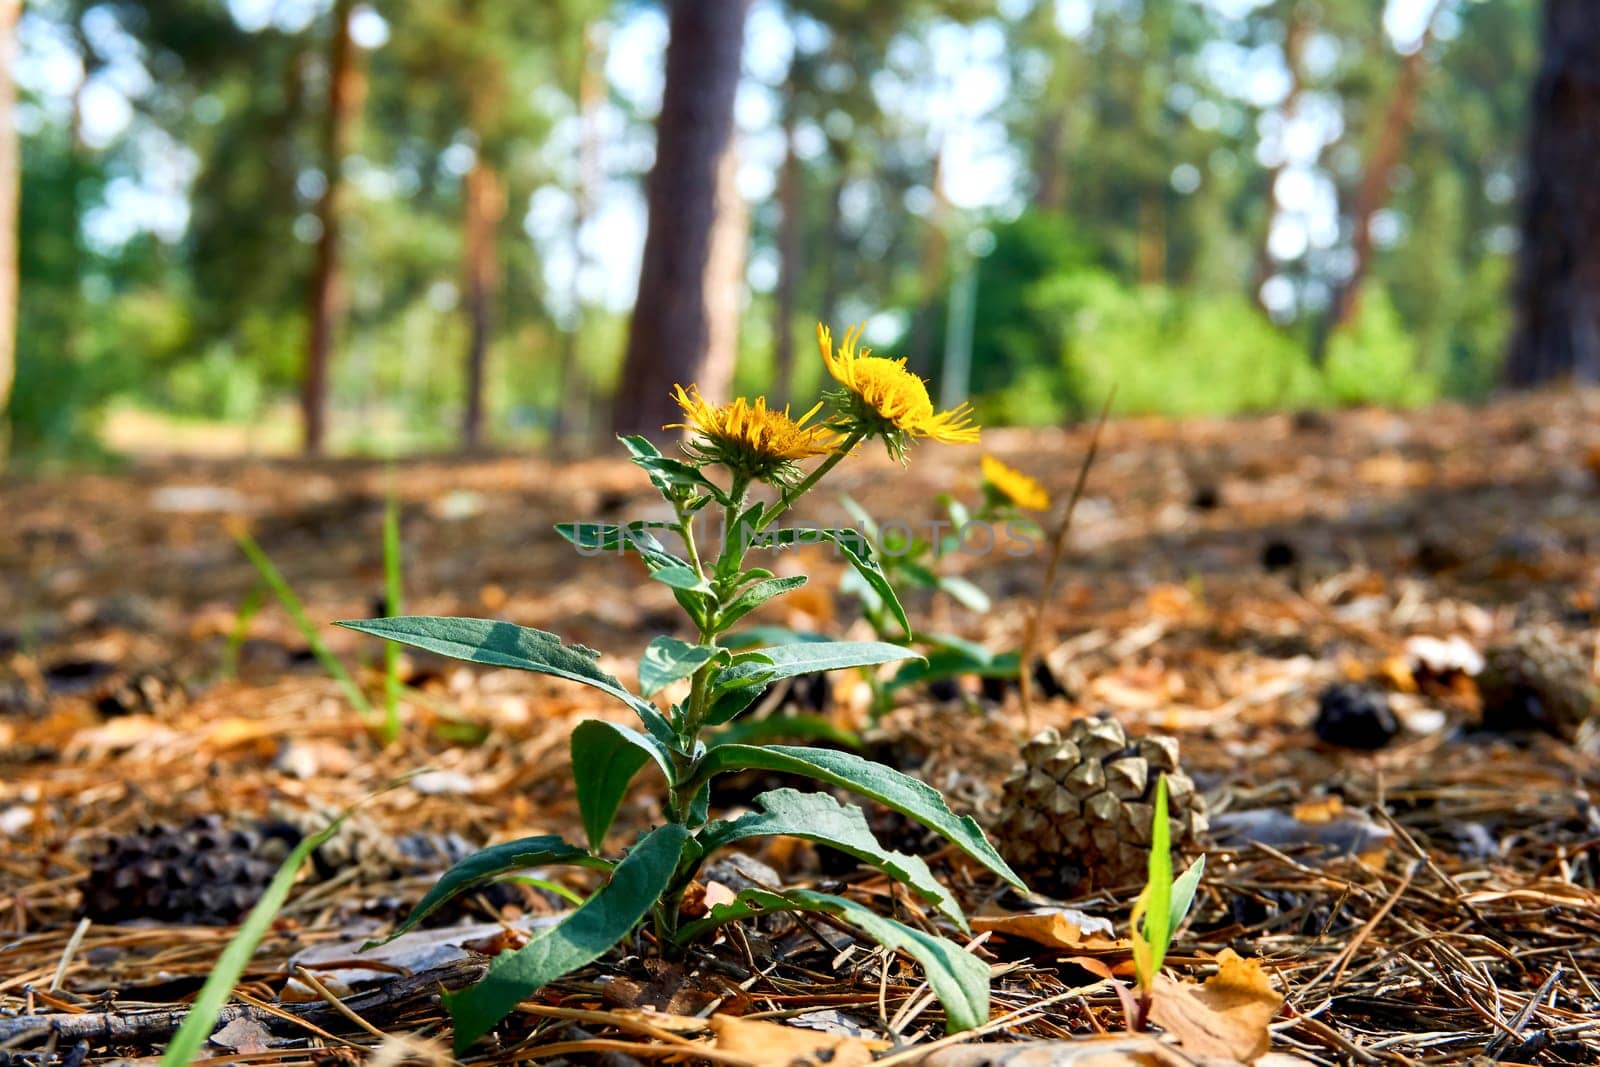 a plant that has yellow daisy like flowers with long slender petals and bitter aromatic roots that are used in herbal medicine